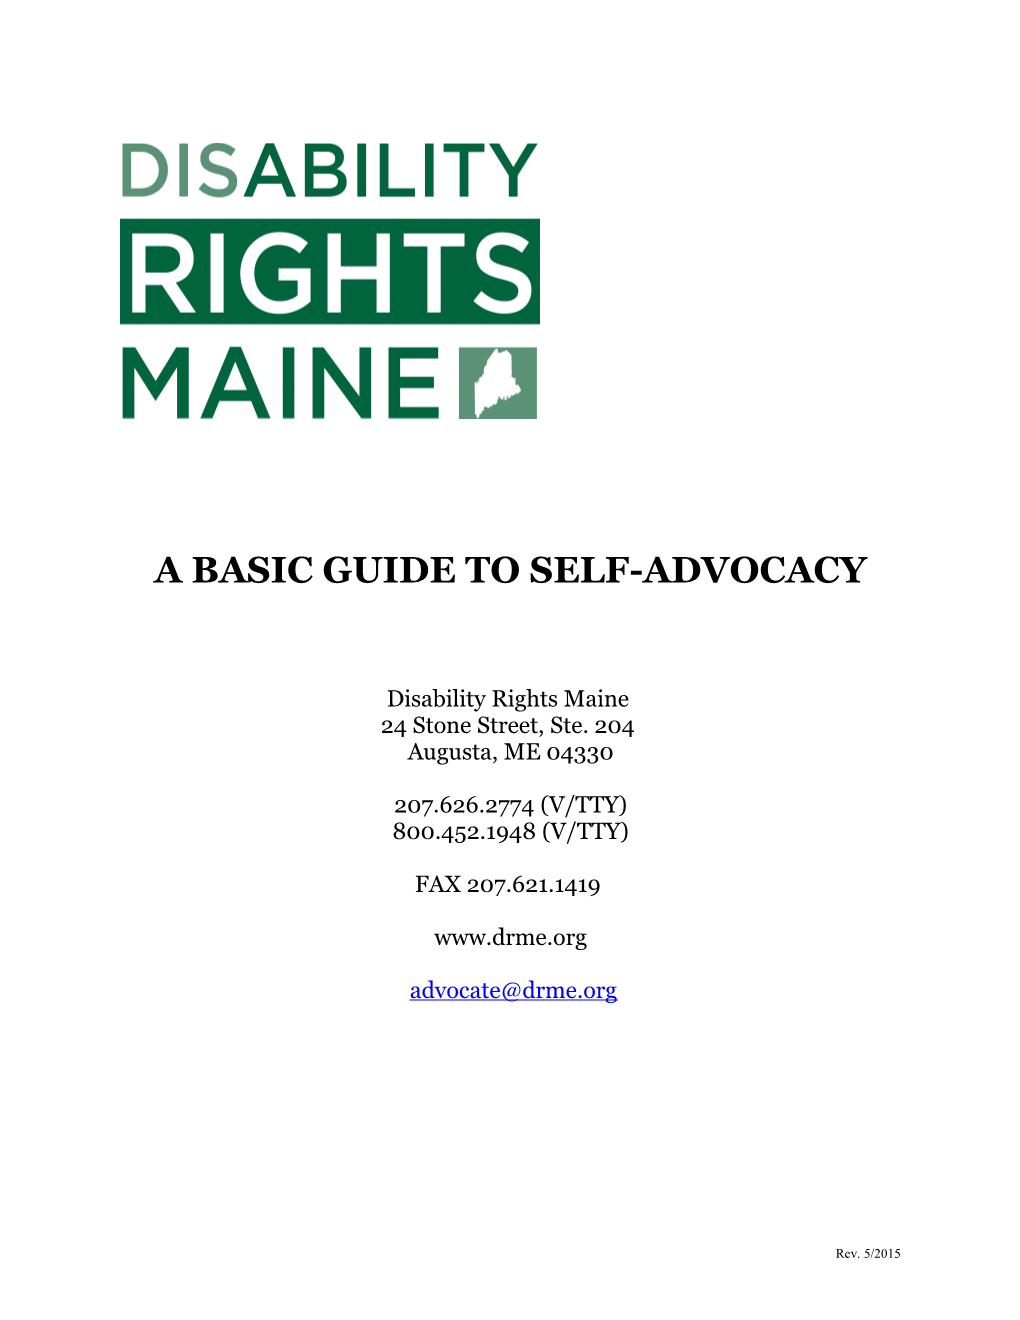 A Basic Guide to Self-Advocacy